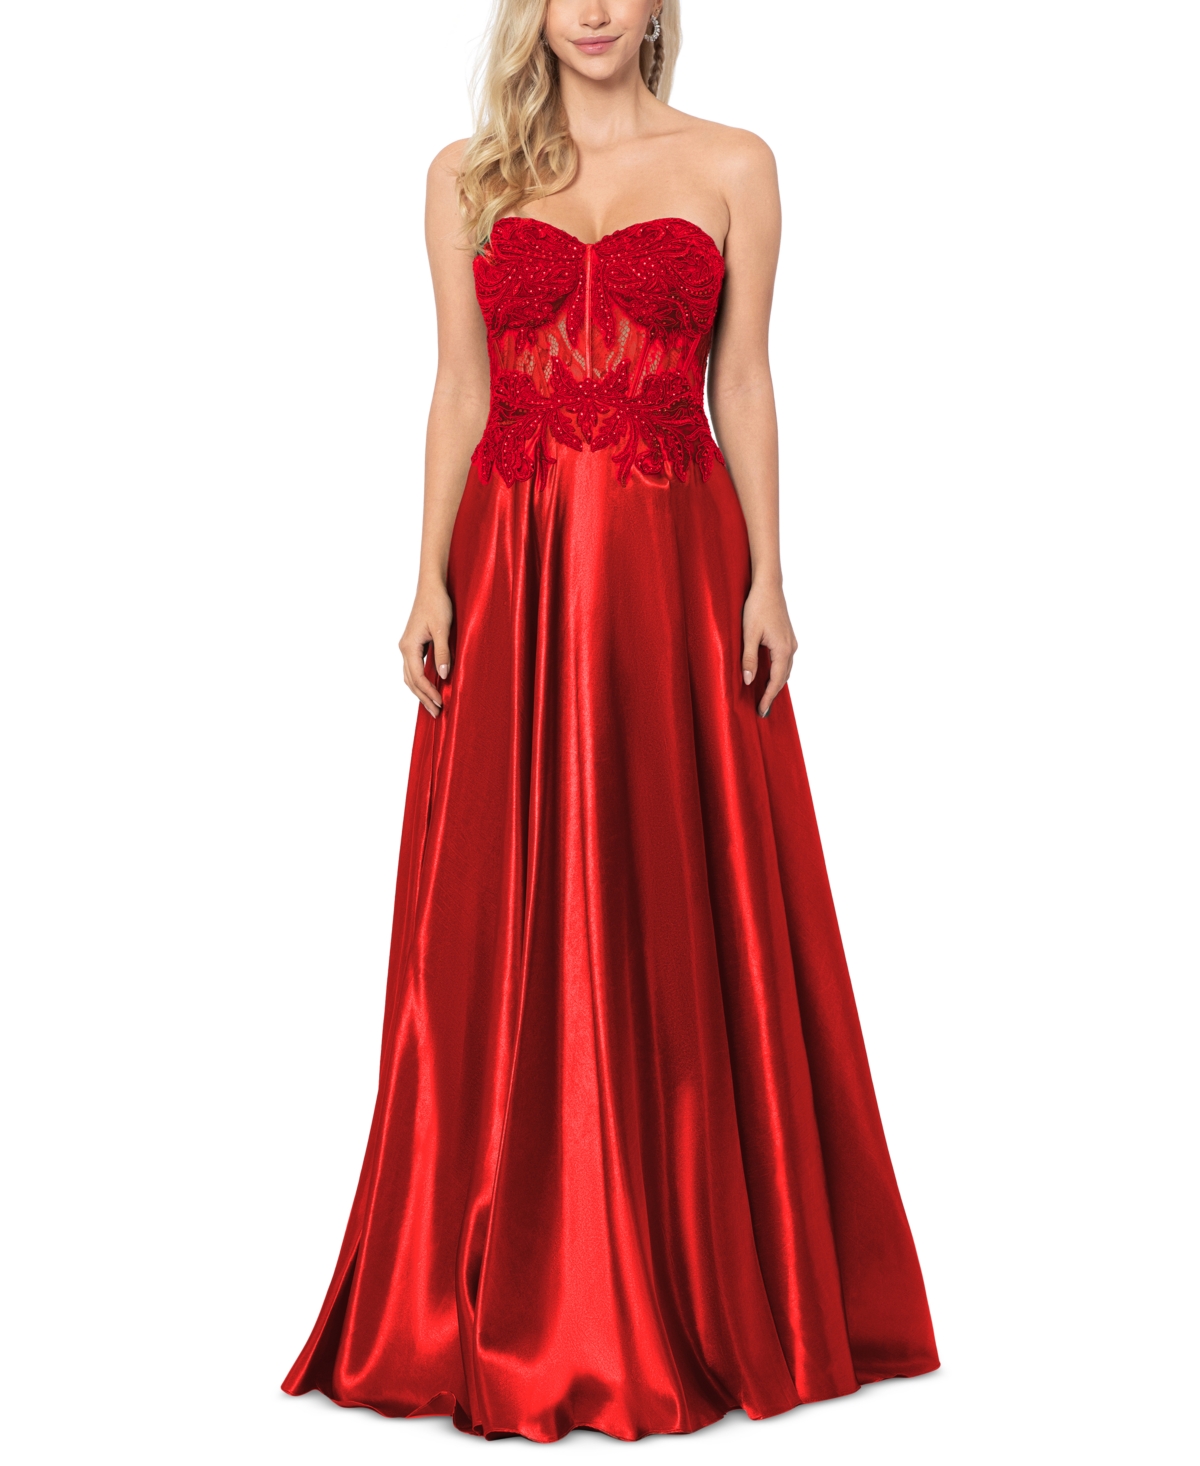 Blondie Nites Juniors' Illusion Applique Charmeuse Gown, Created for Macy's